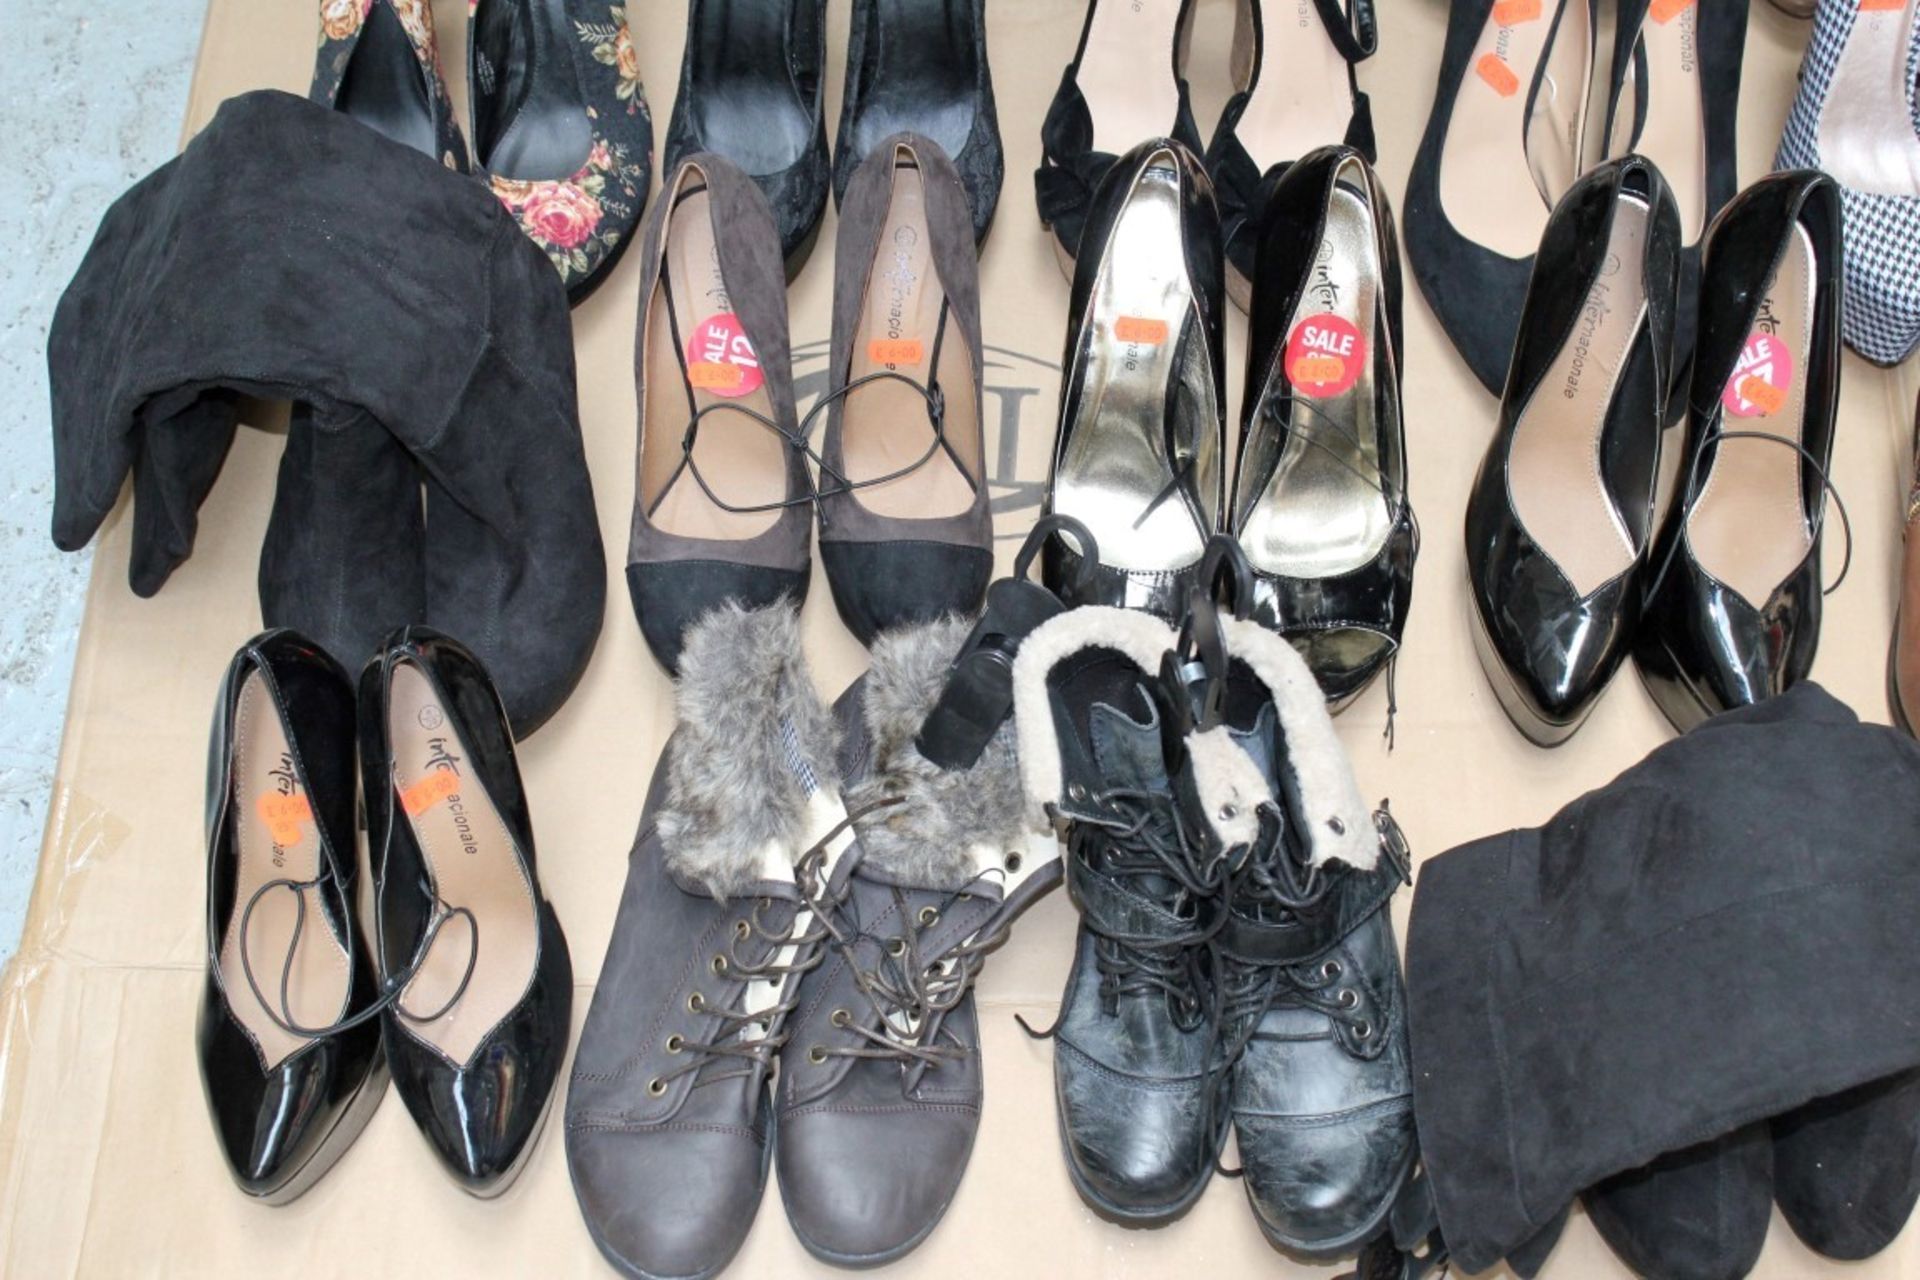 30 x Pairs Of Assorted Ladies Footwear – Box2604 – Includes Shoes & Boots - Various Colours, Sizes & - Image 3 of 6